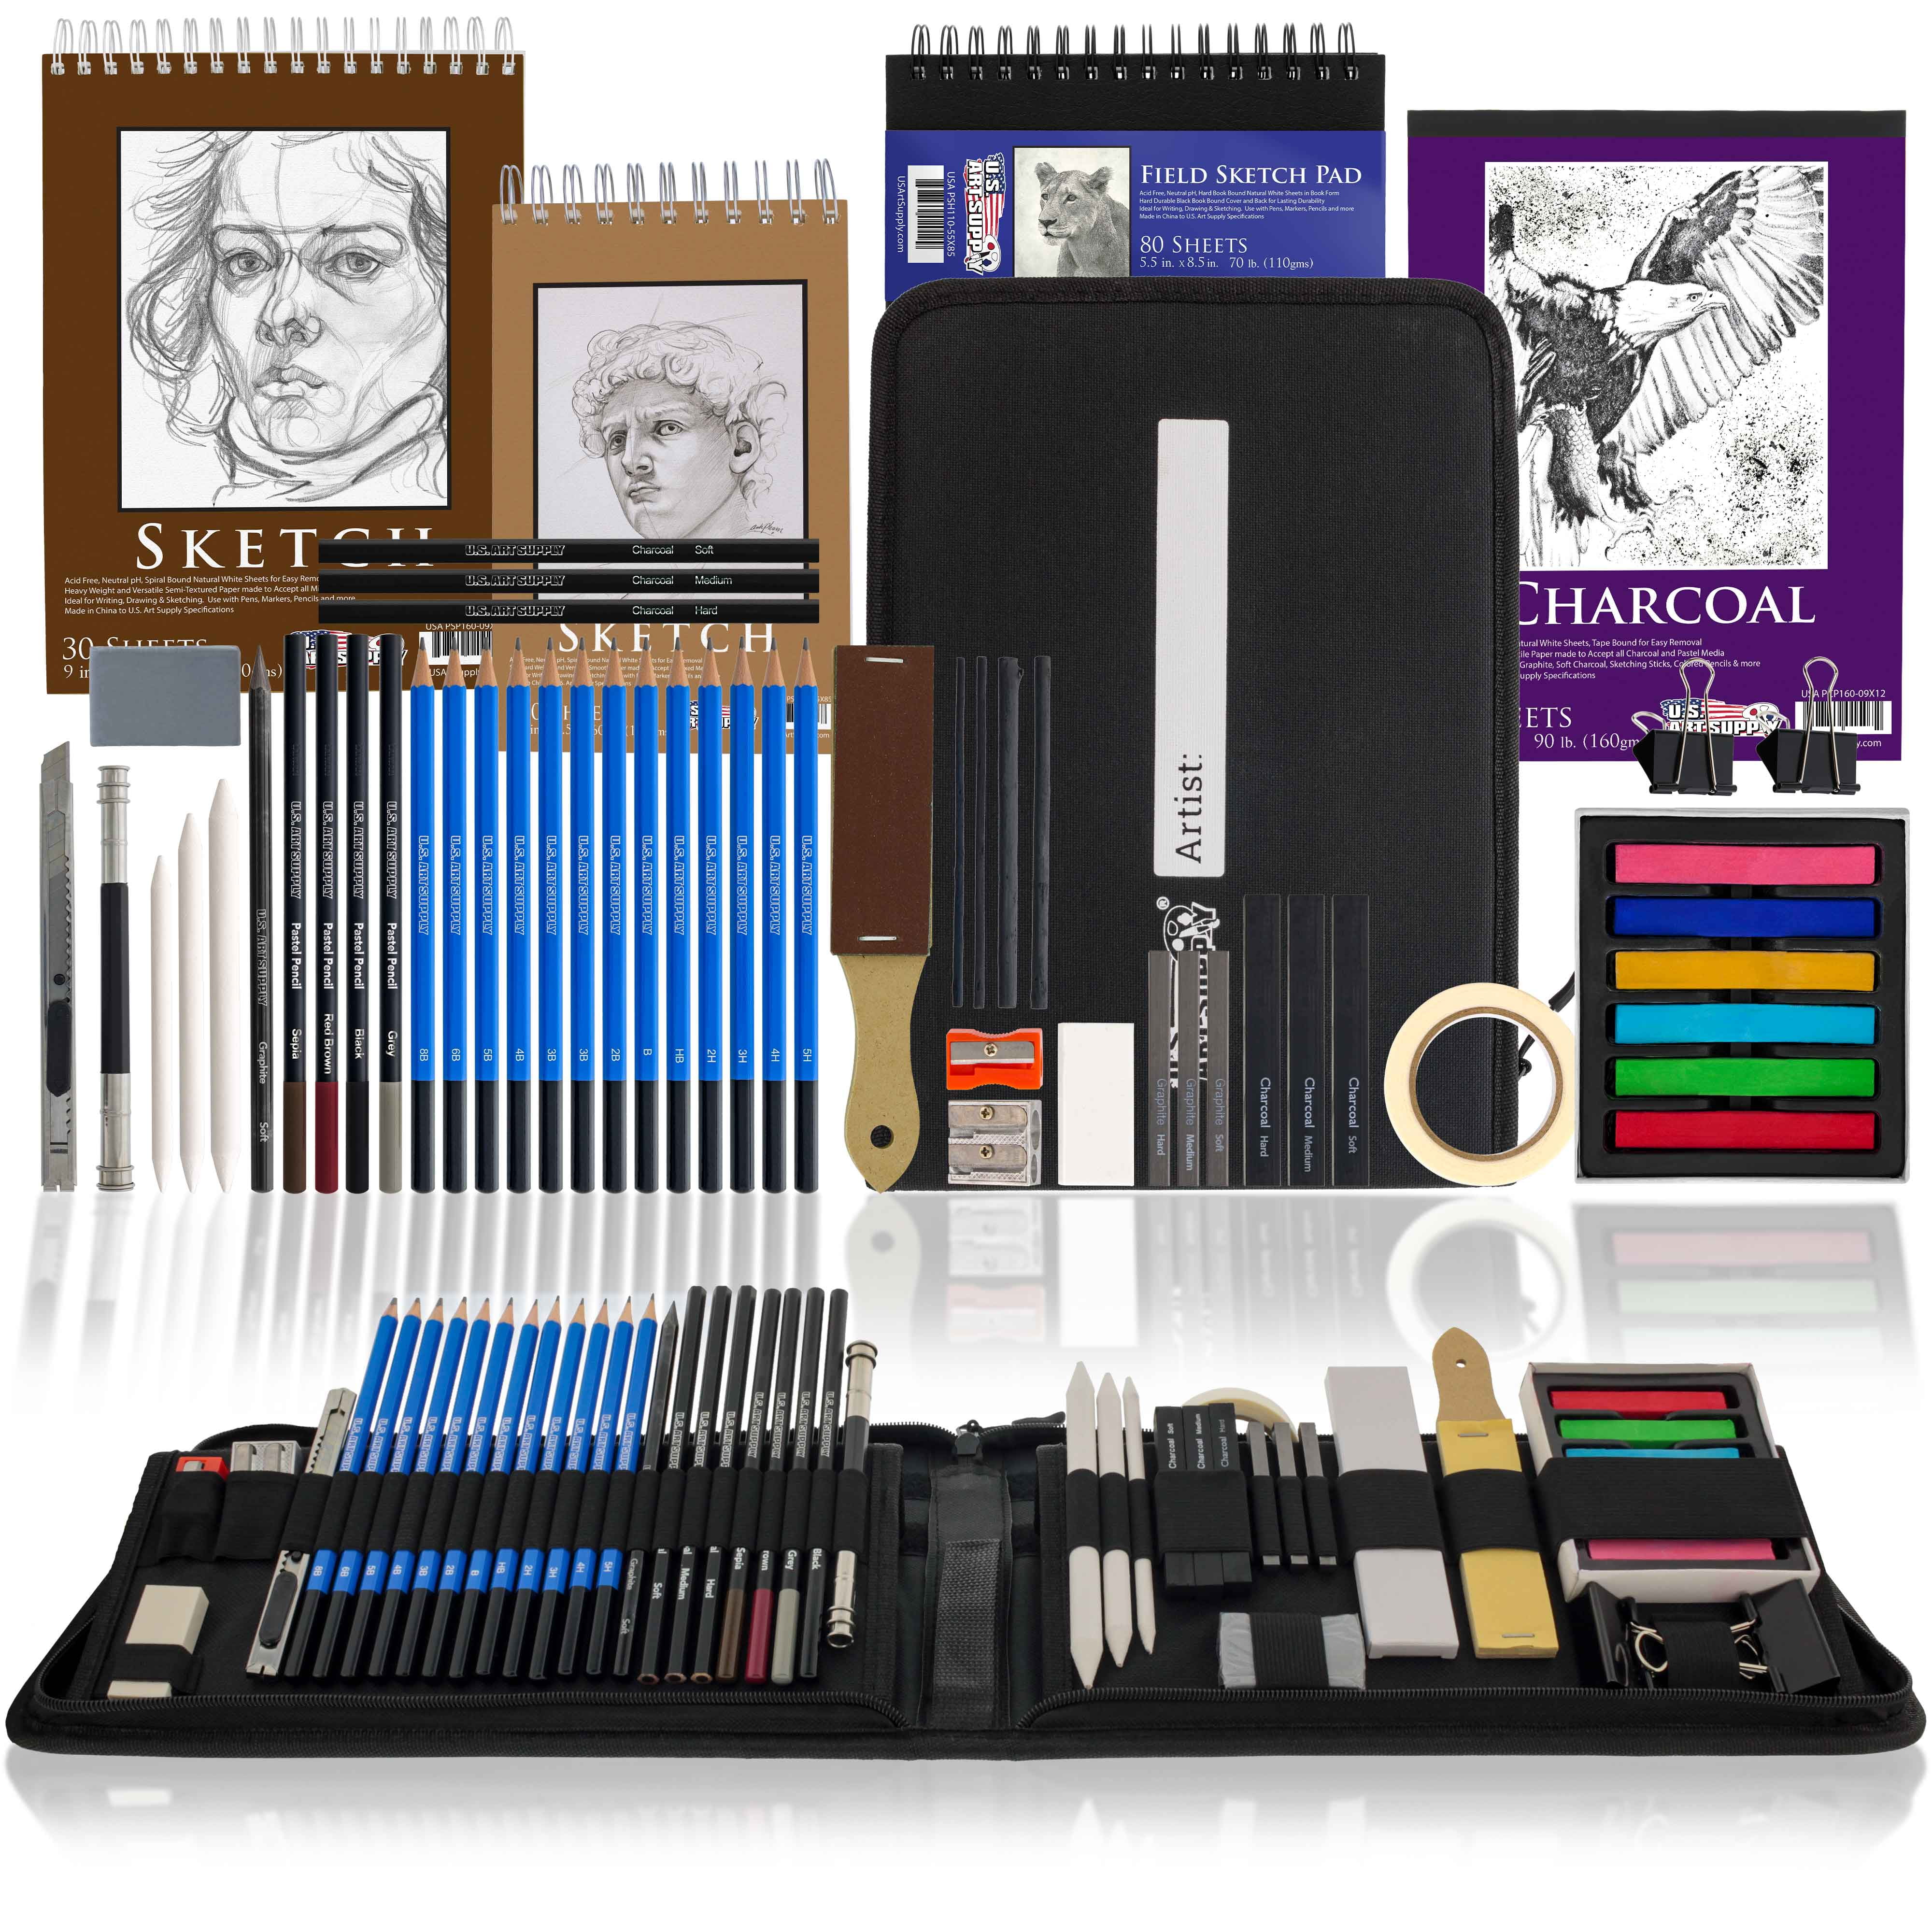  Prina 76 Pack Drawing Set Sketching Kit, Pro Art Supplies with  3-Color Sketchbook, Include Tutorial, Colored, Graphite, Charcoal,  Watercolor & Metallic Pencil, for Artists Adults Teens Beginner : Arts,  Crafts